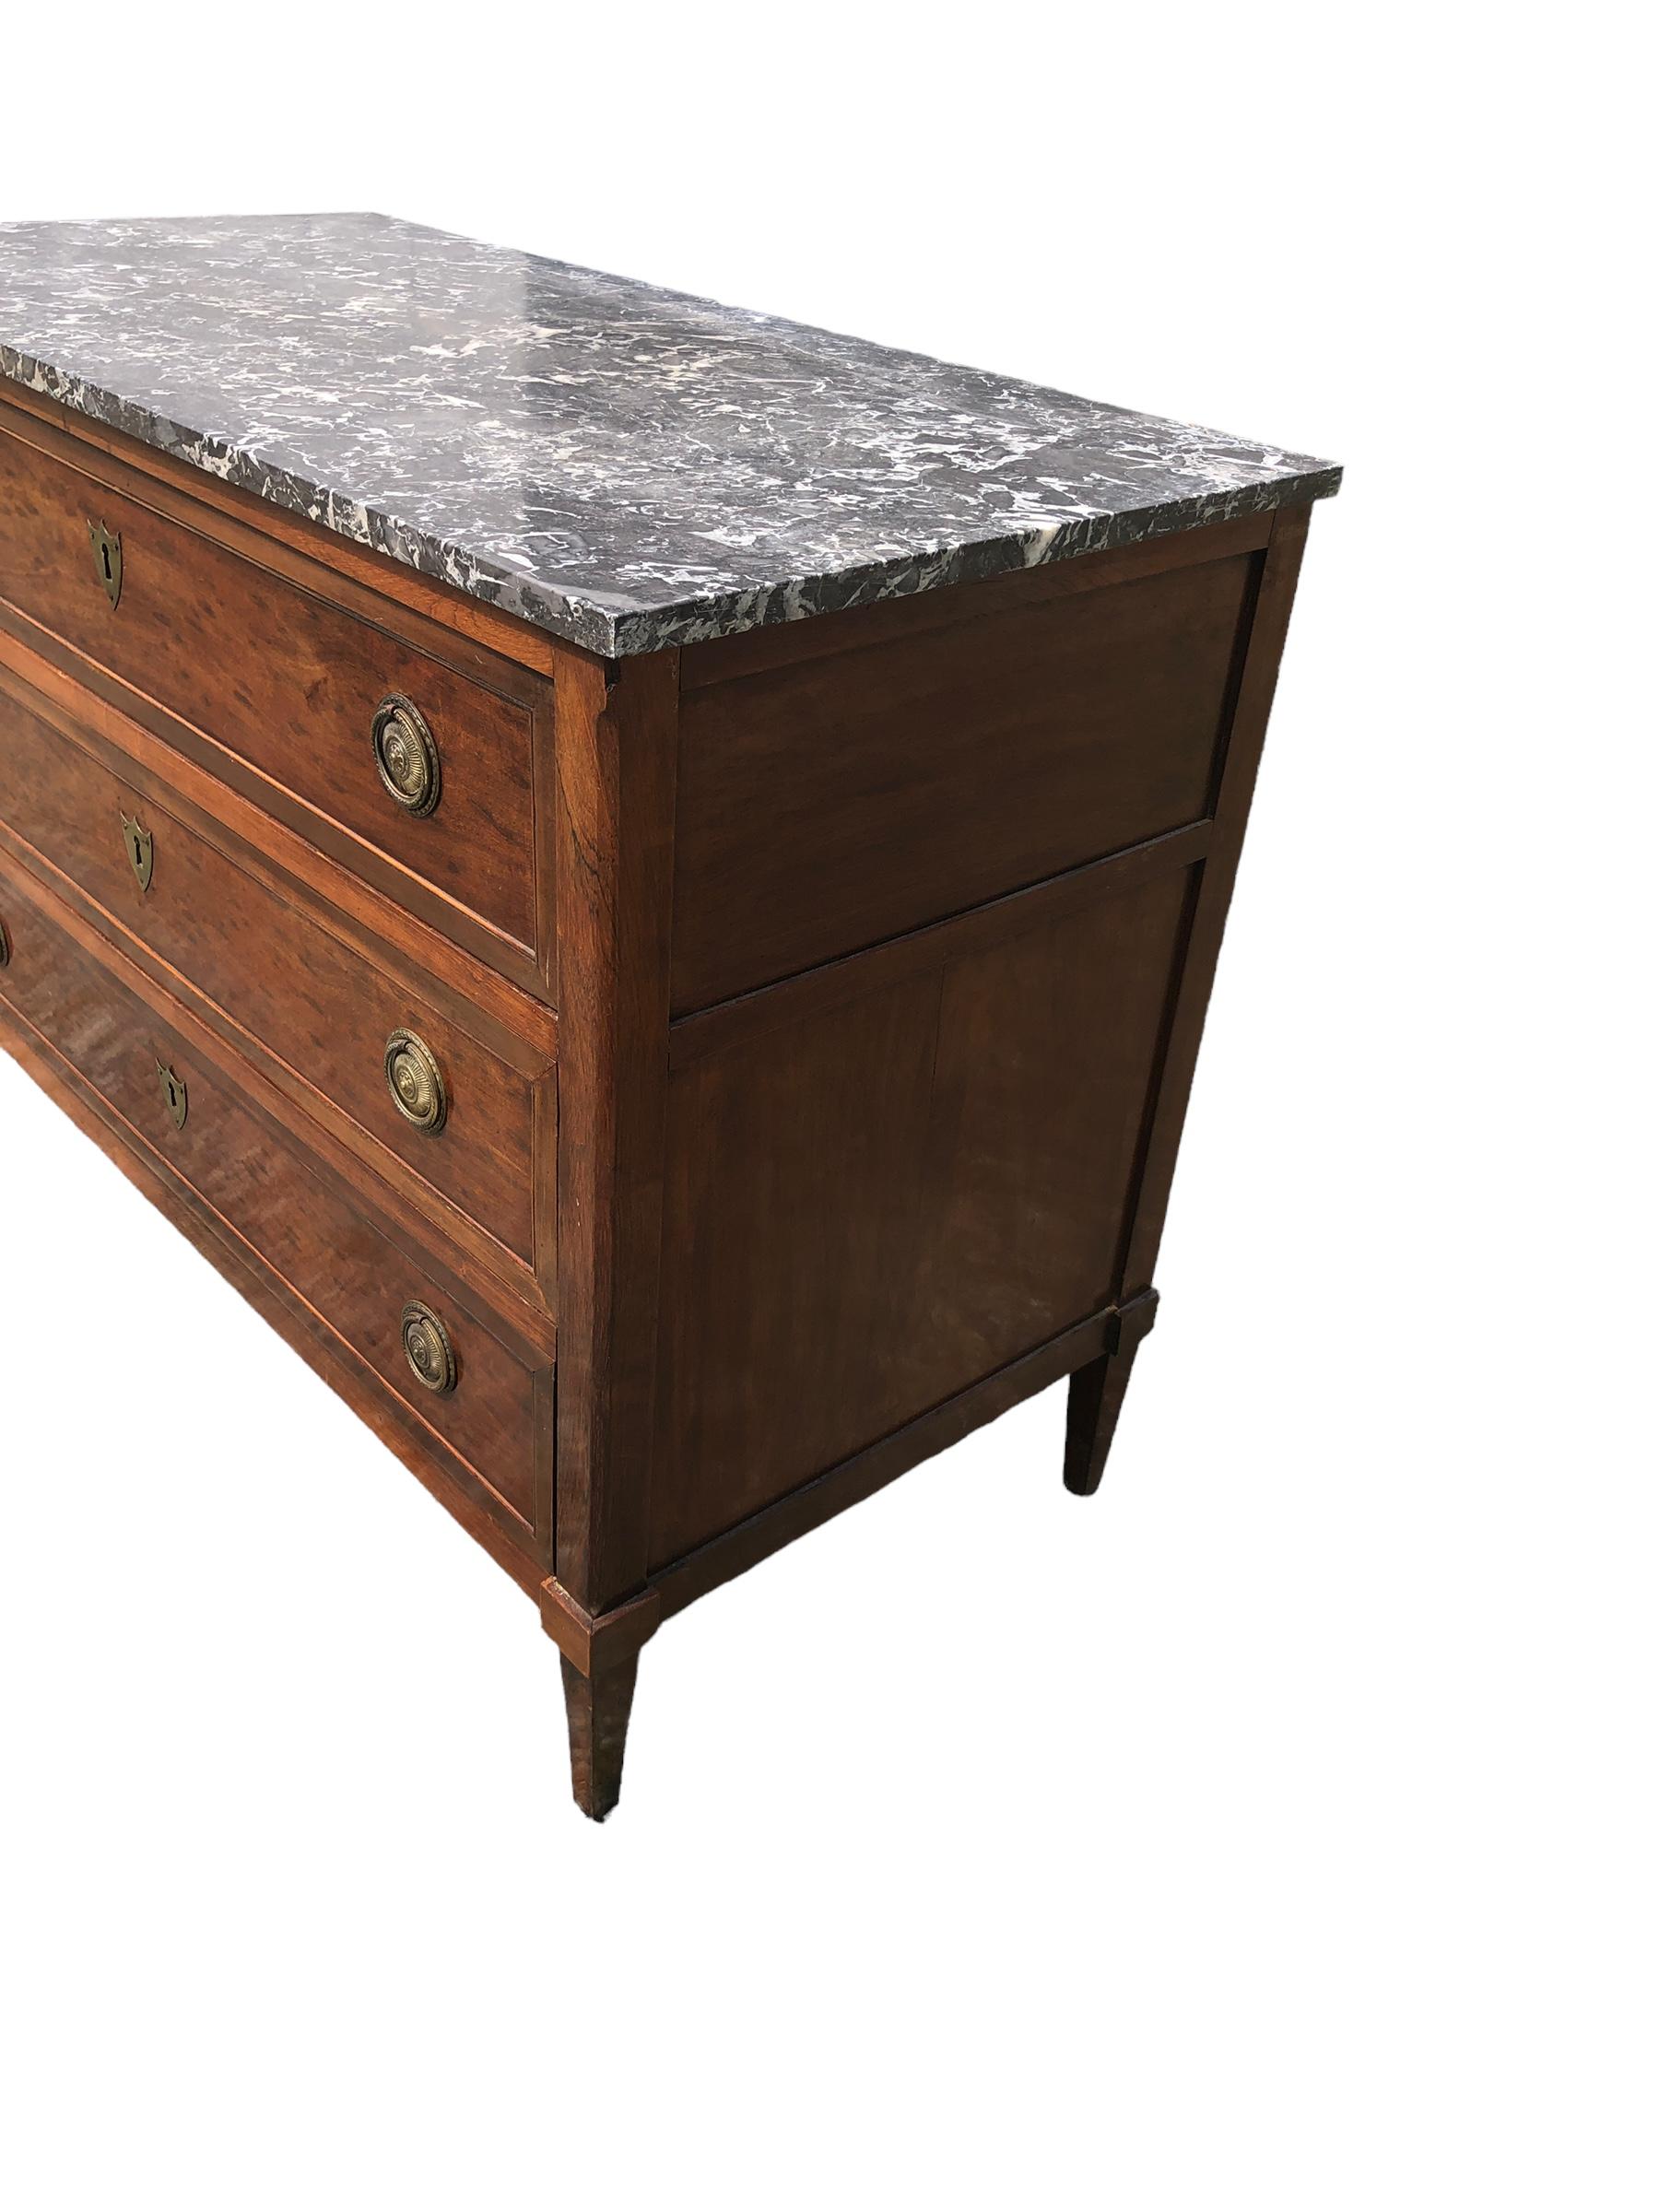 19th Century Louis XVI Style Marble Top Plum Pudding Mahogany Chest For Sale 4